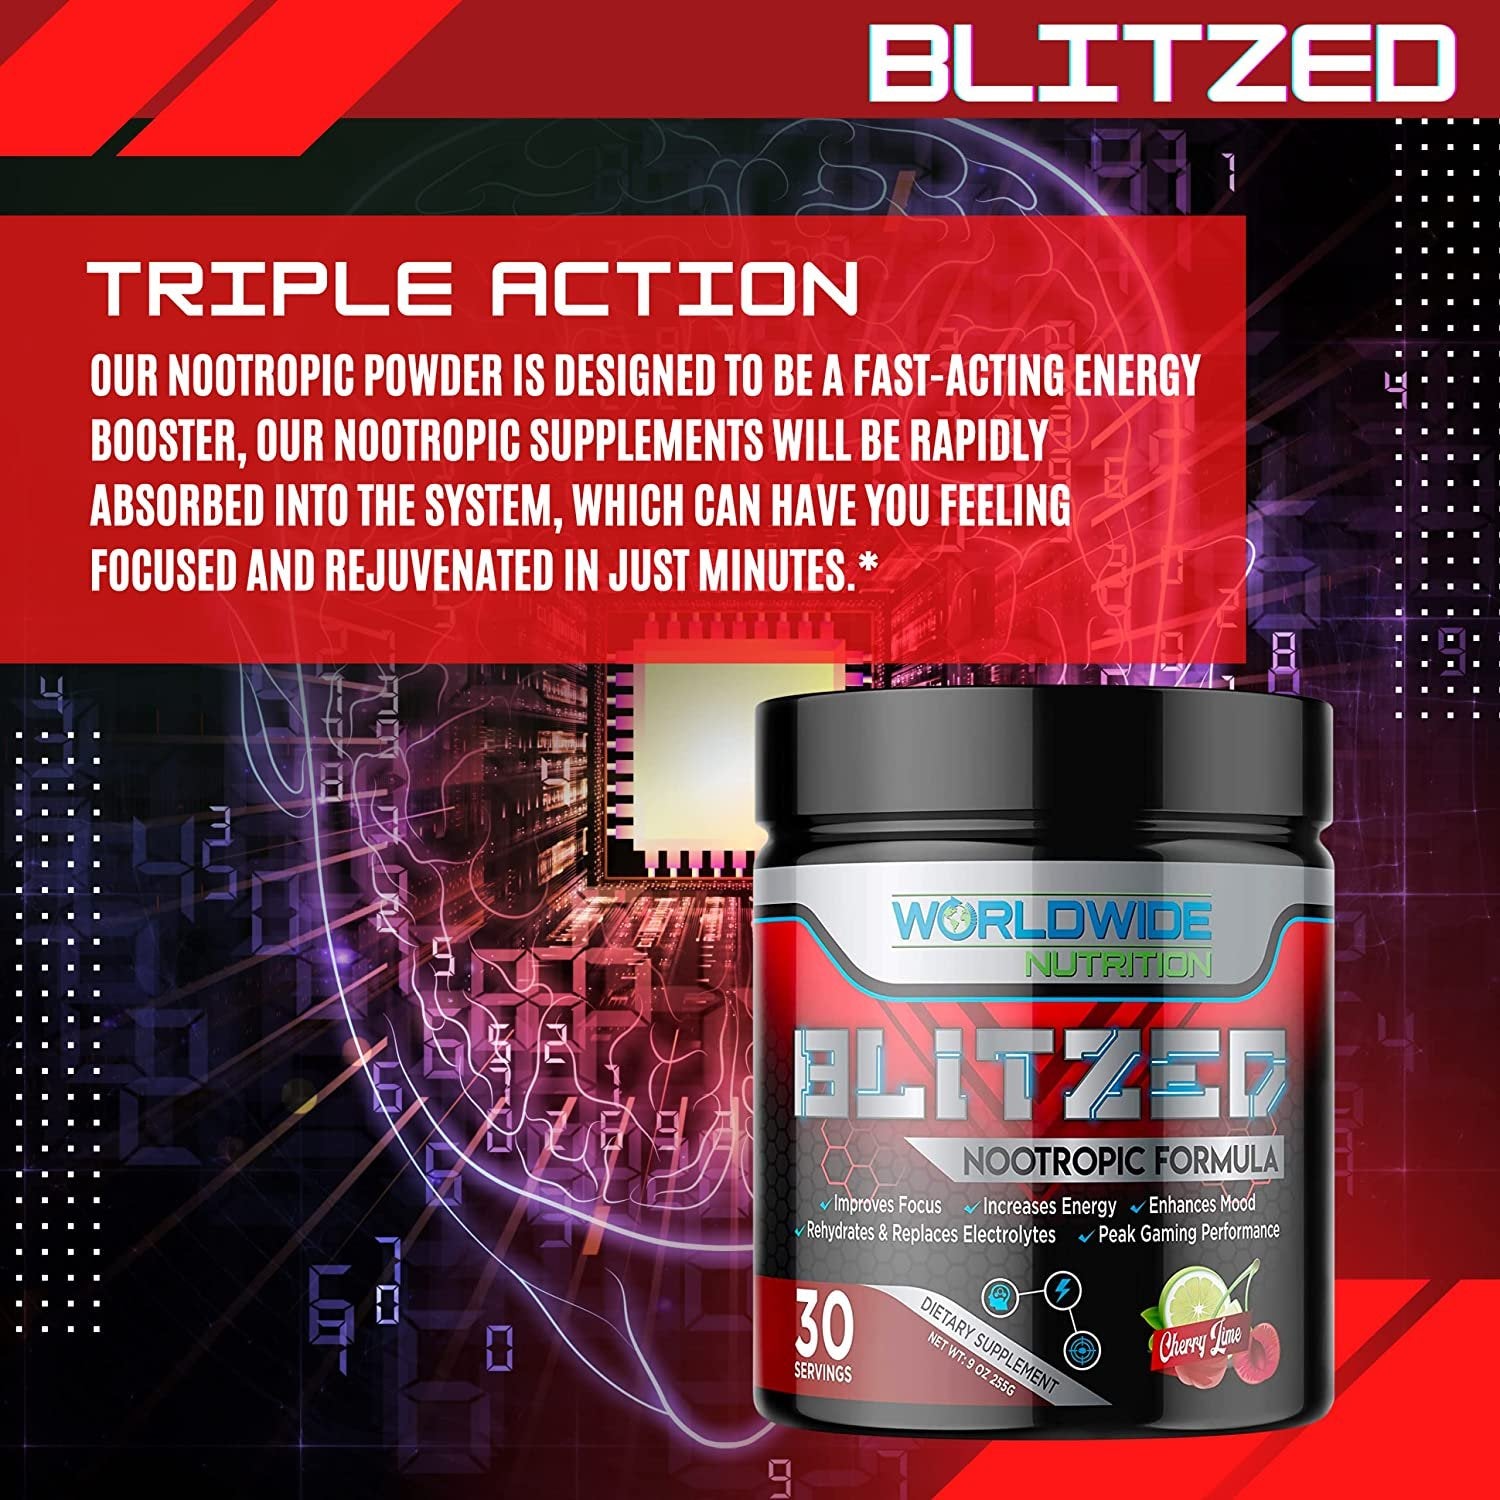 Worldwide Nutrition Blitzed Nootropic Formula - All Natural Energy Drink Mix Powder - Brain Supplements for Memory and Focus - Enhanced Focus and Energy Supplement- Cherry Lime Flavor - 30 Servings